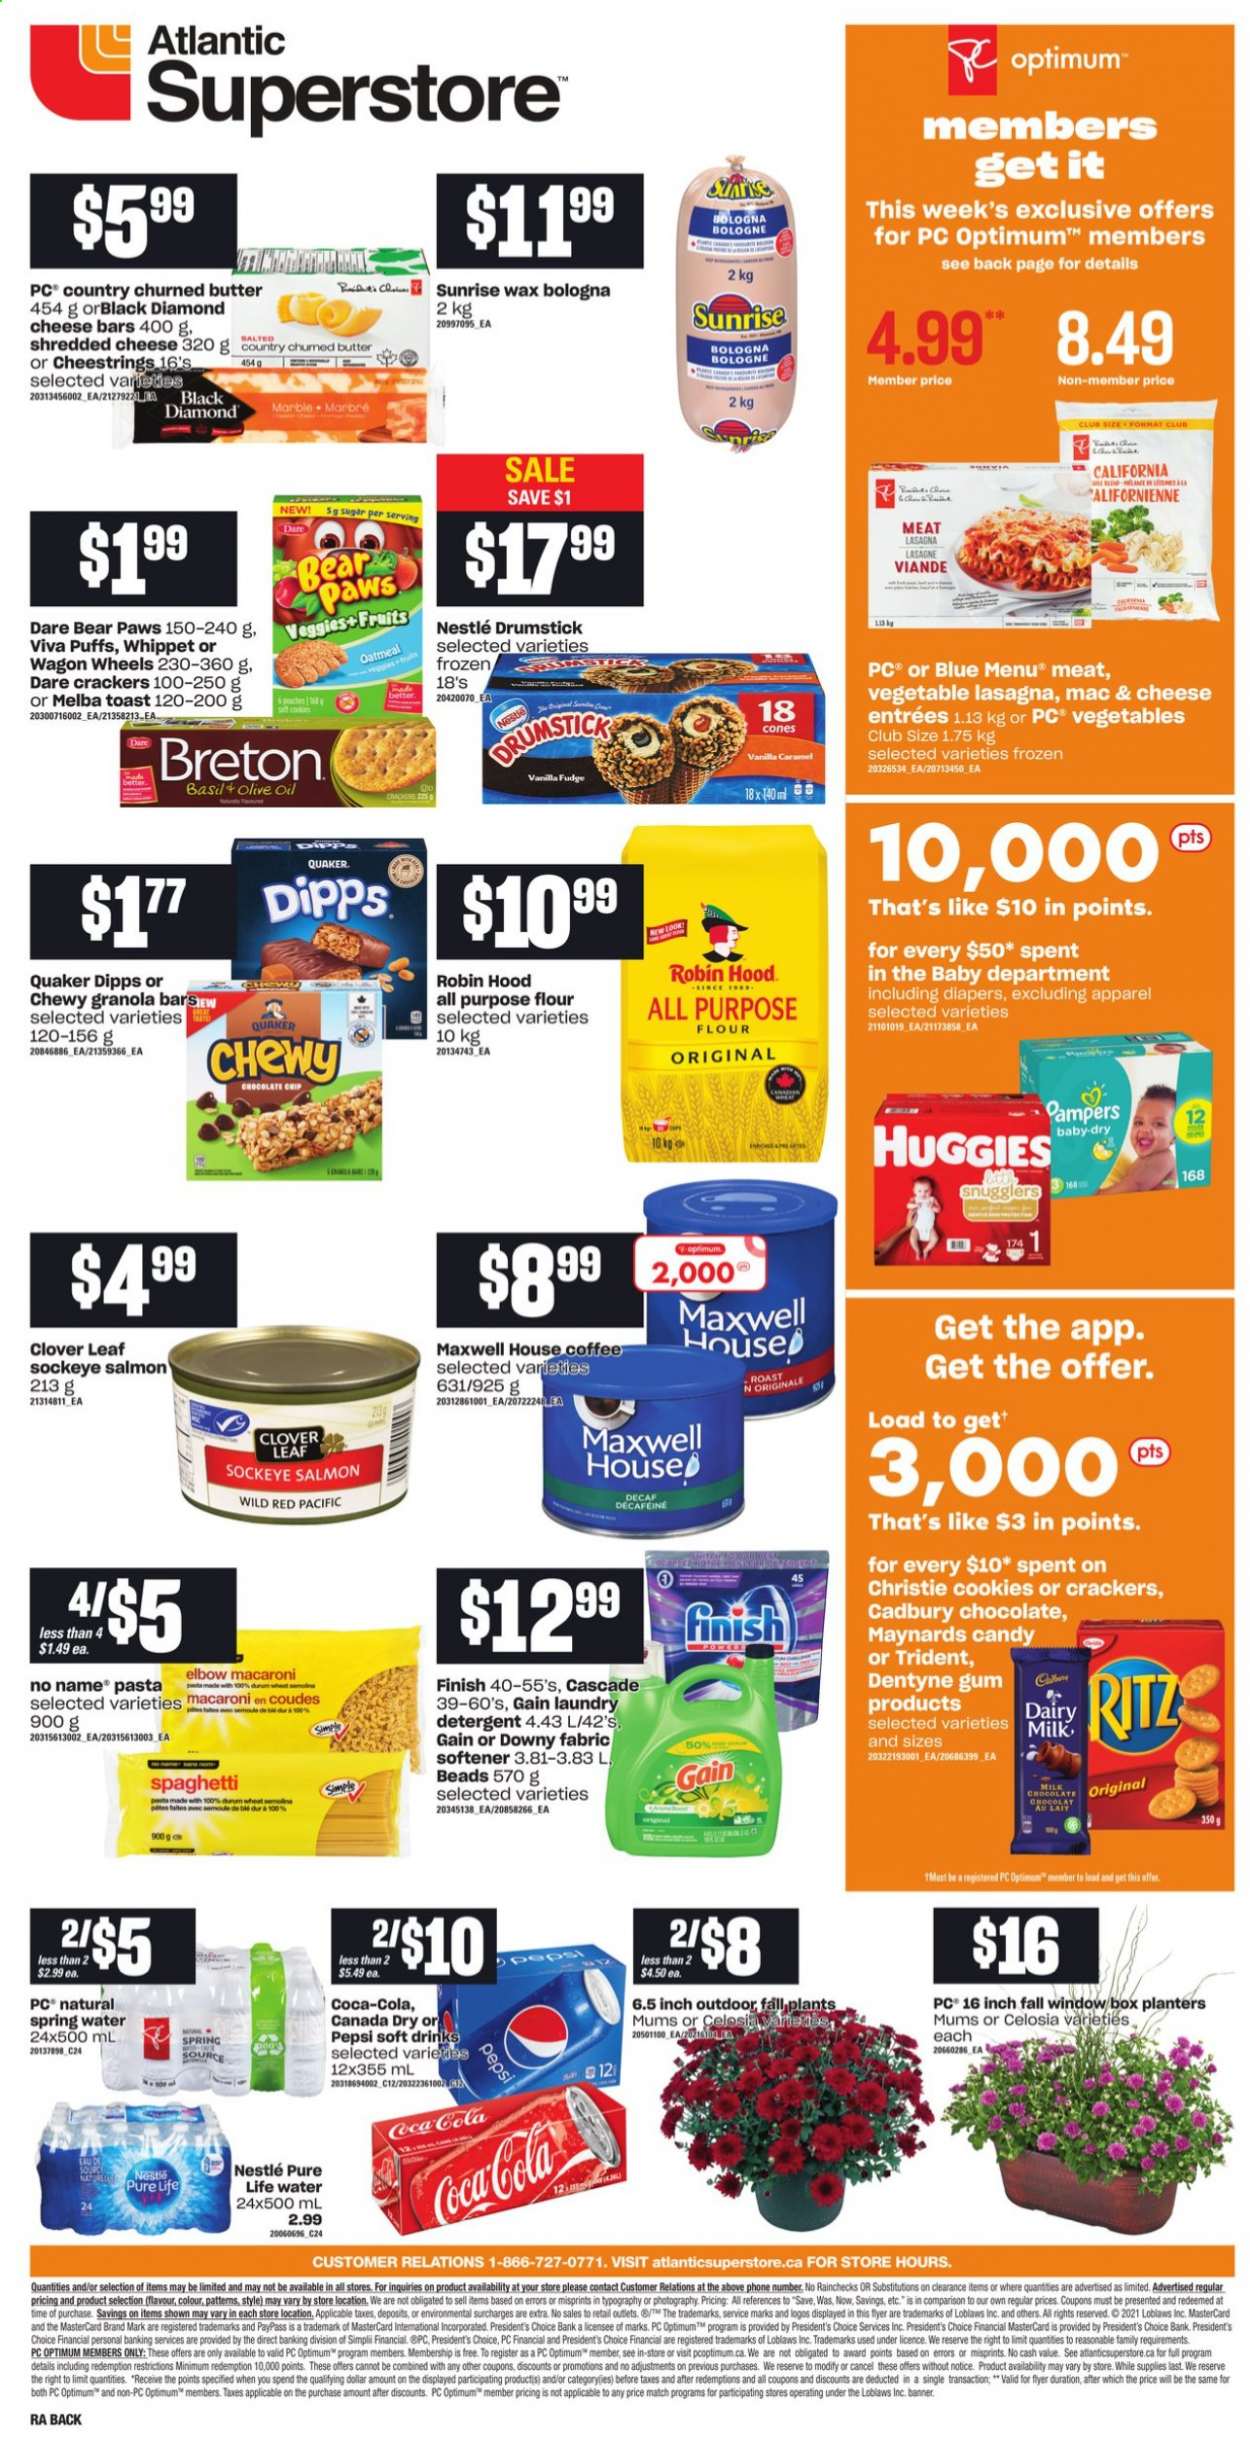 thumbnail - Atlantic Superstore Flyer - August 19, 2021 - August 25, 2021 - Sales products - puffs, salmon, No Name, spaghetti, macaroni, pasta, Quaker, lasagna meal, bologna sausage, shredded cheese, string cheese, Président, Clover, butter, cookies, fudge, milk chocolate, chocolate, crackers, Cadbury, Dairy Milk, Trident, RITZ, all purpose flour, flour, semolina, sugar, oatmeal, granola bar, caramel, oil, Planters, Canada Dry, Coca-Cola, Pepsi, soft drink, spring water, Maxwell House, coffee, nappies, Gain, fabric softener, laundry detergent, Cascade, Downy Laundry, Paws, Optimum, Nestlé, Huggies, Pampers. Page 2.